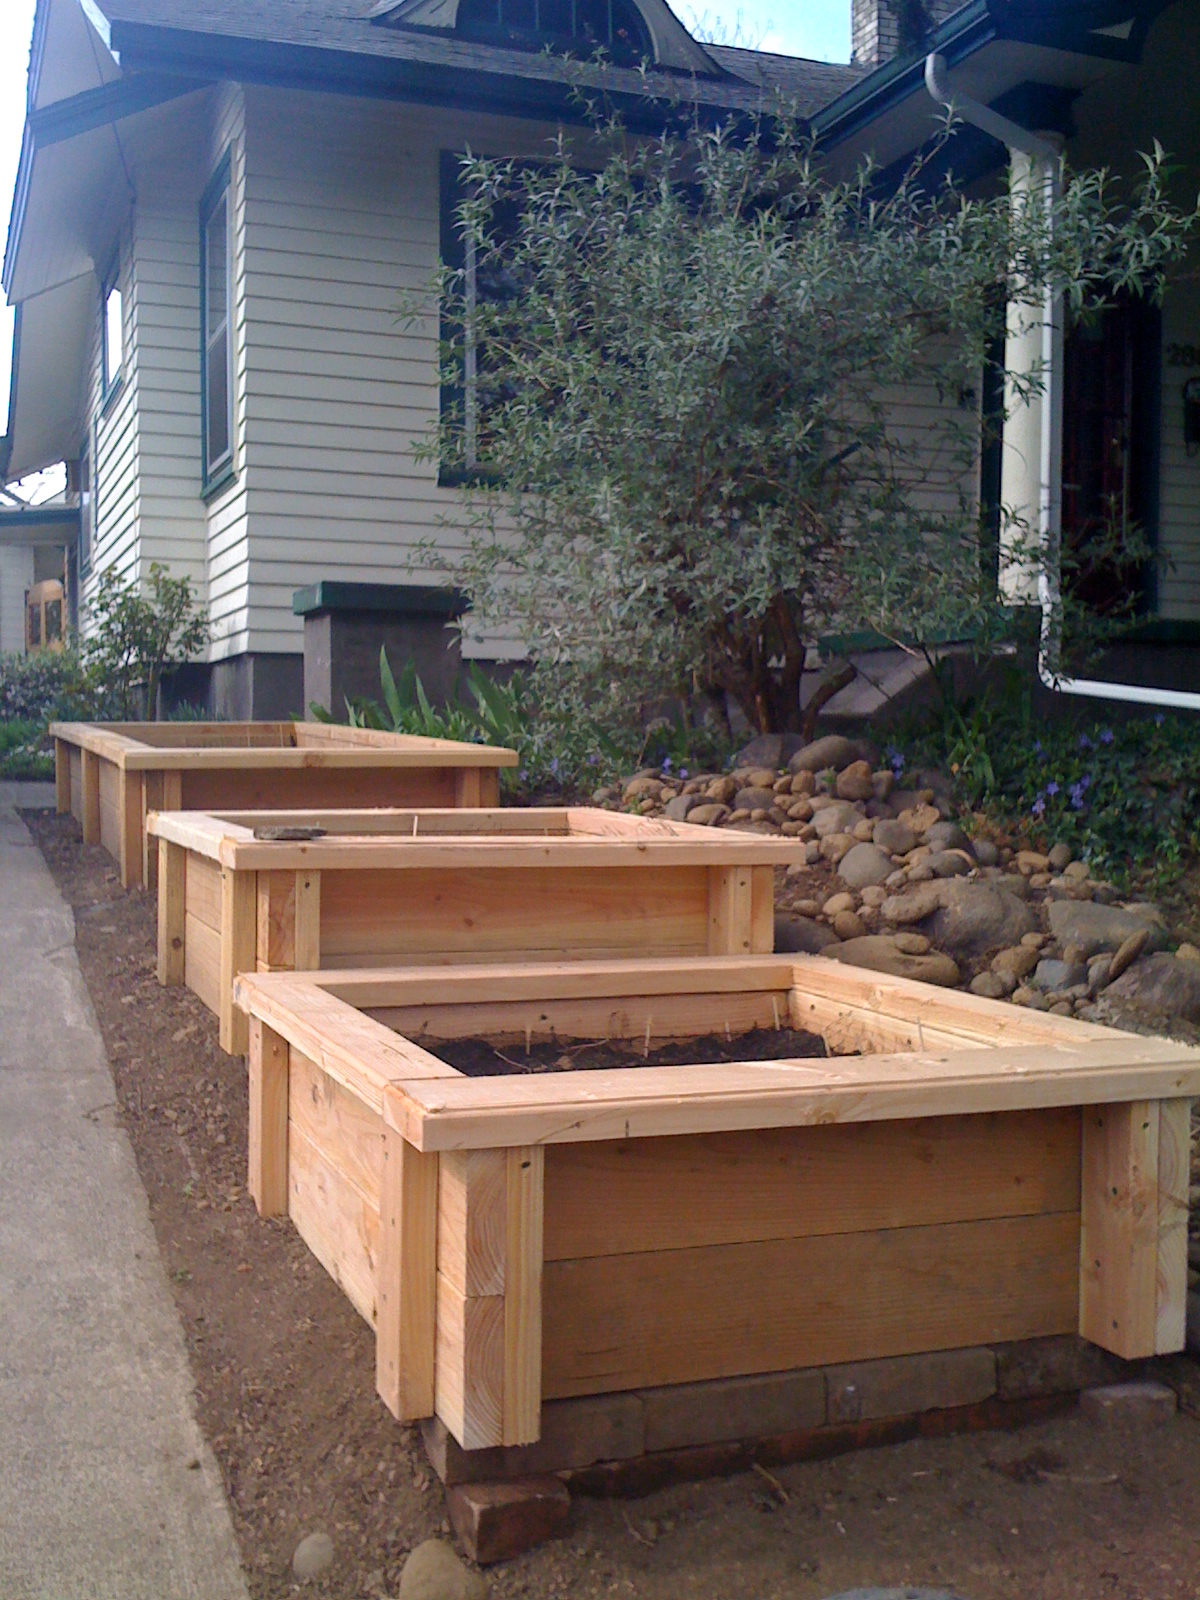 Building planter boxes Andy Idsinga make fix share repeat